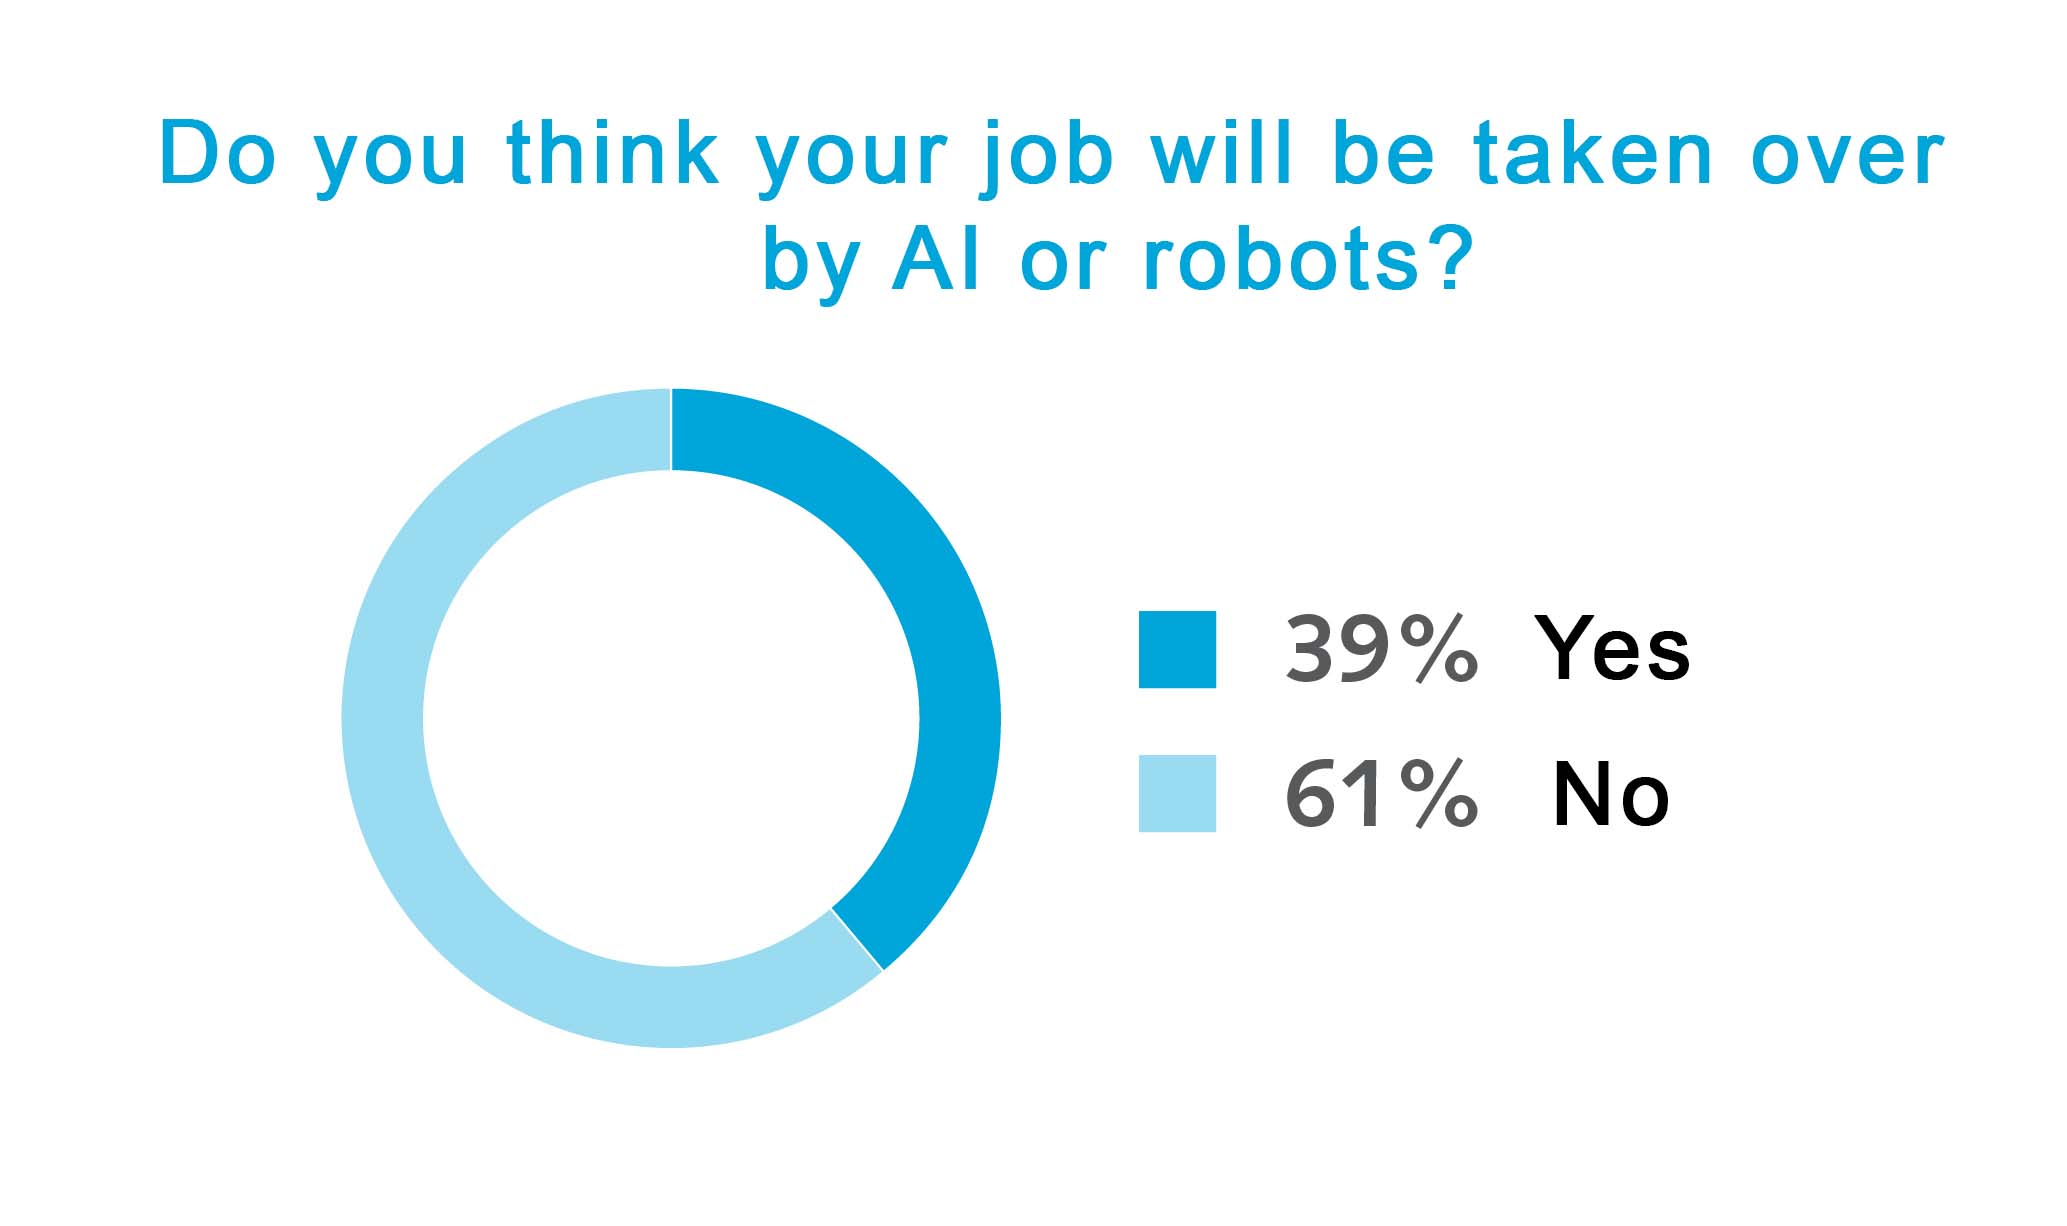 Do you think your job will be taken over by AI or robots?